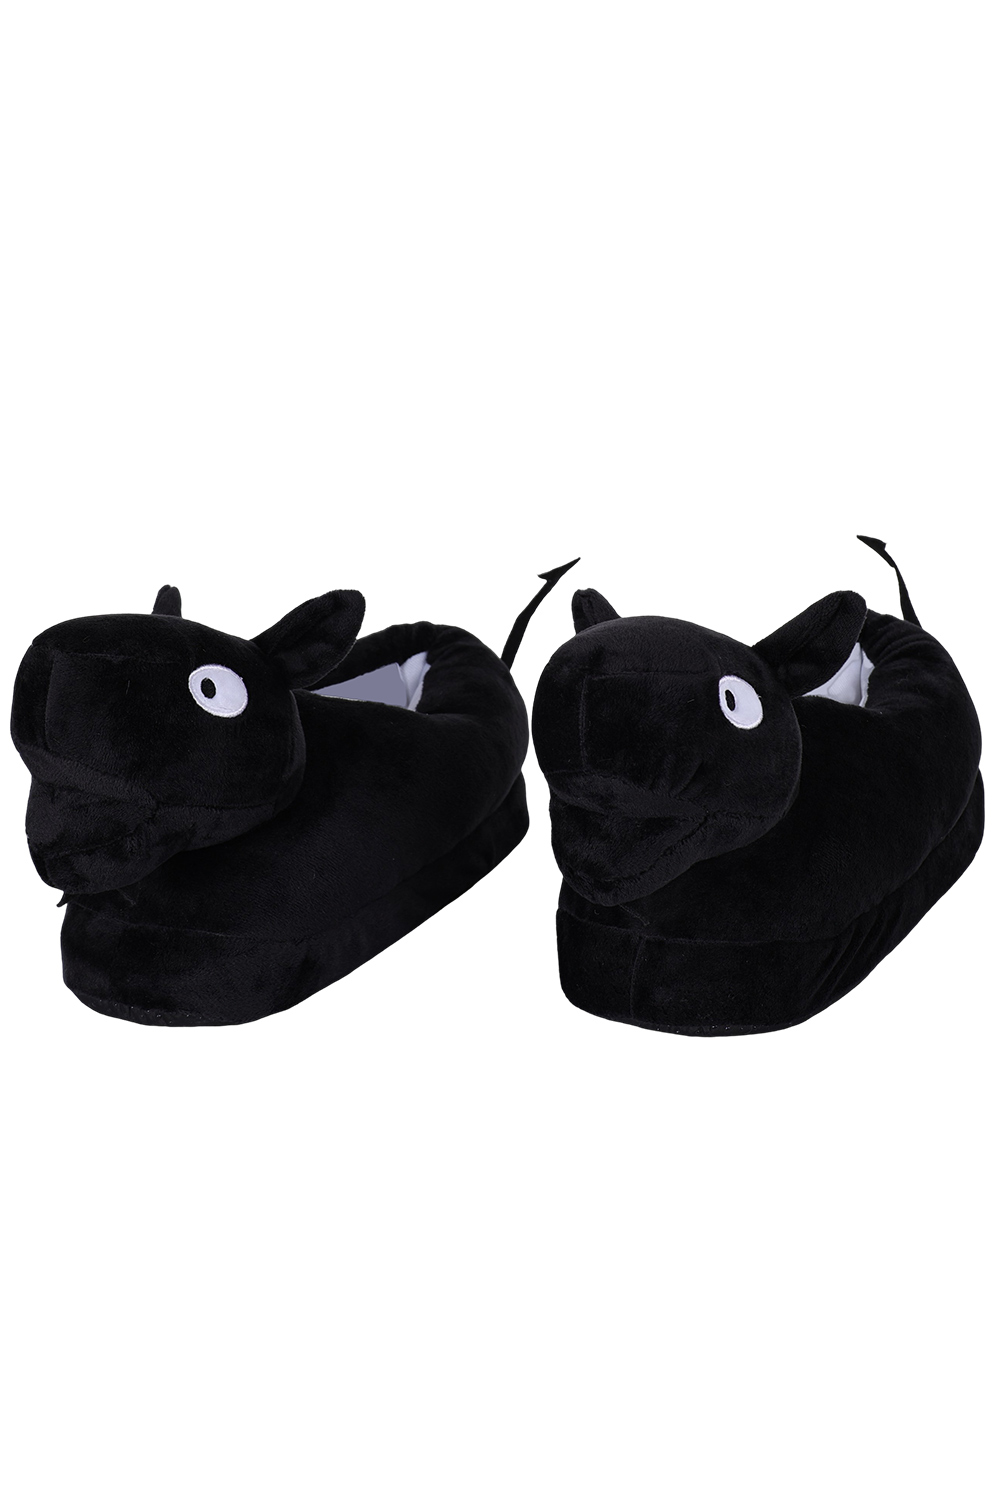 Disenchantment Demon Luci Cosplay Cotton Slippers Shoes Halloween Costumes Accessory Props Original Design